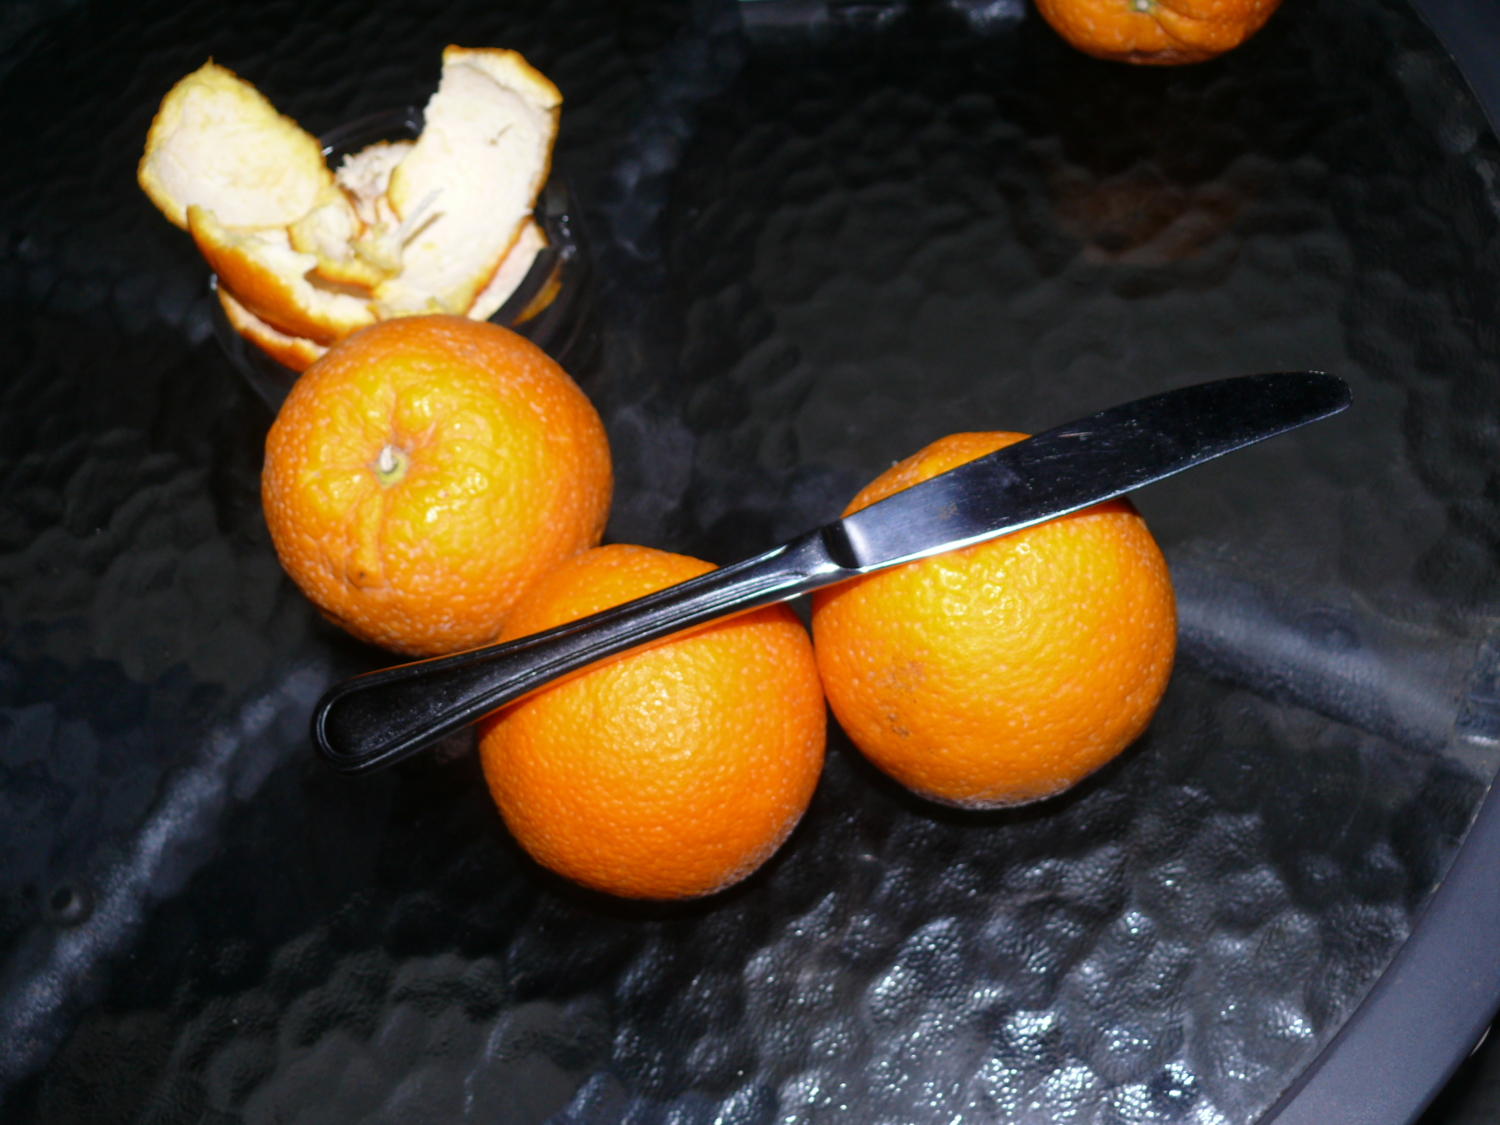 Oranges and a knife